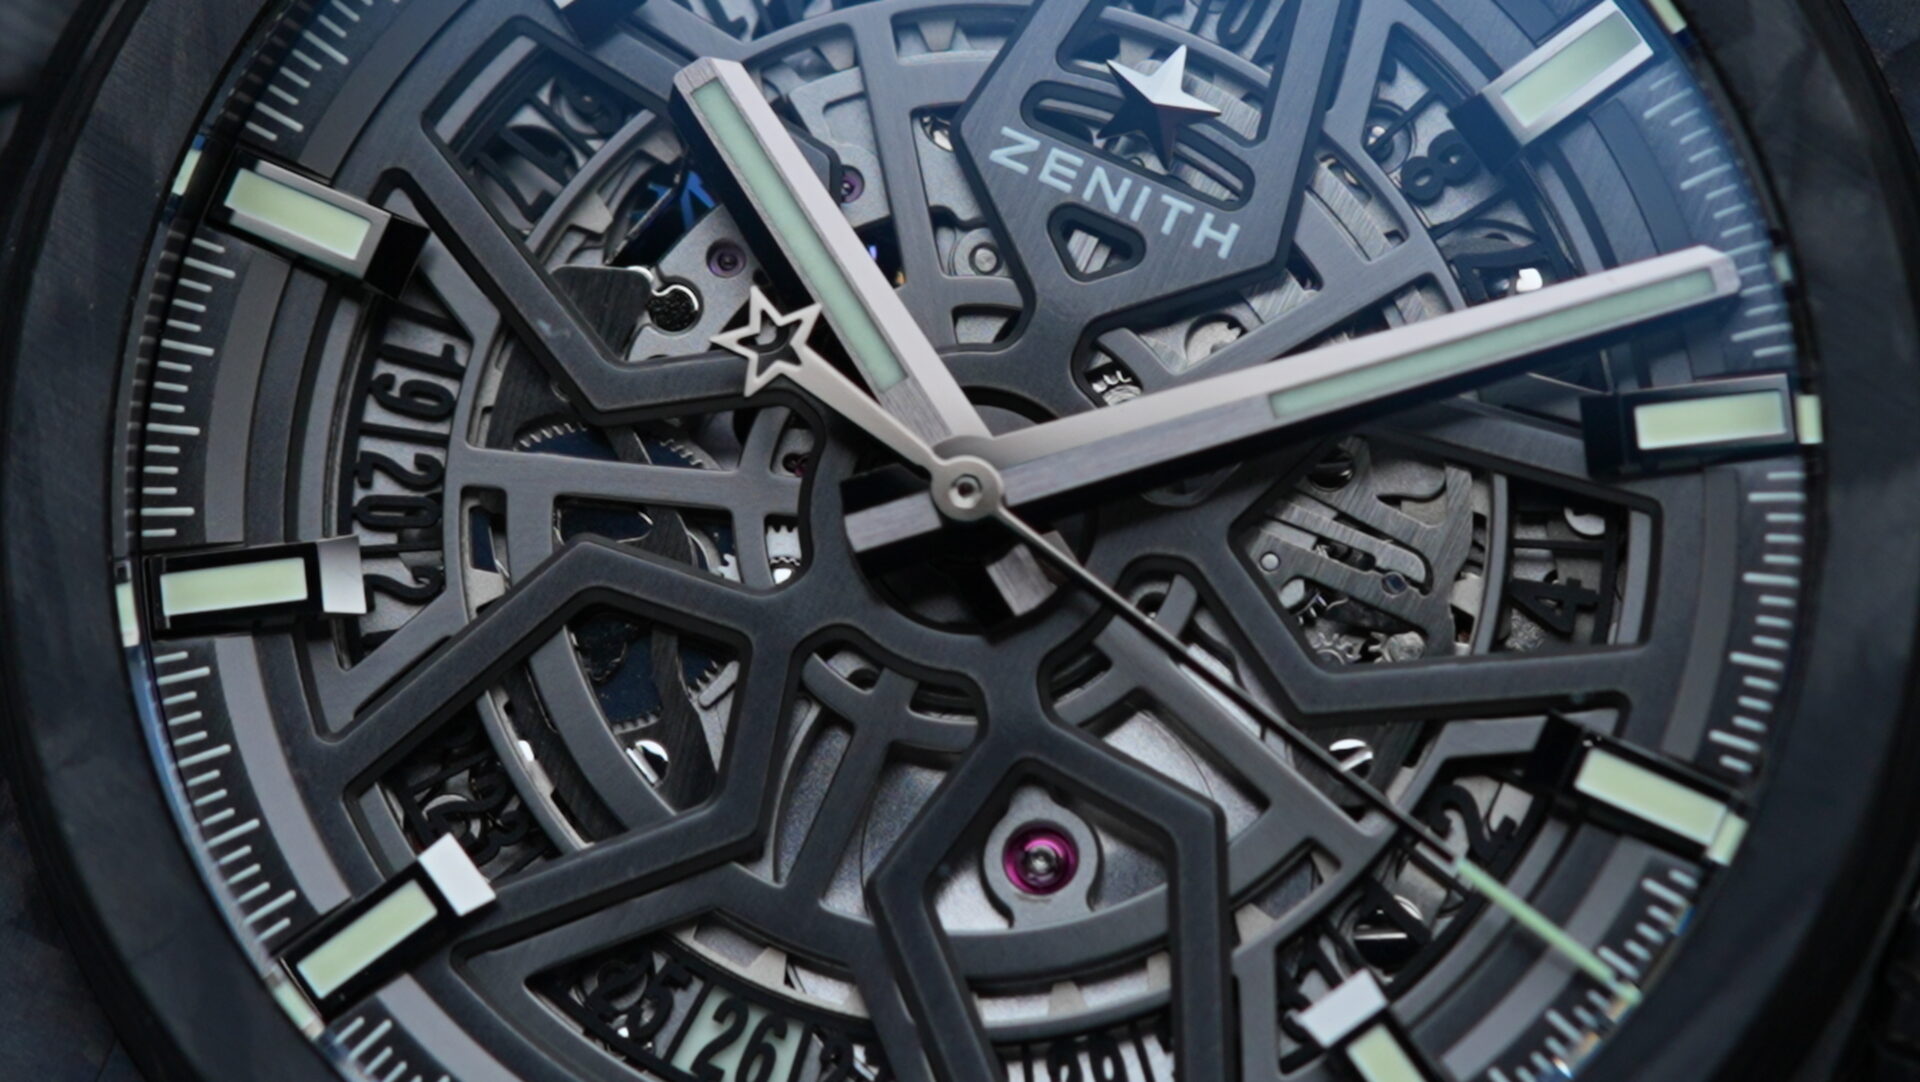 Macro shot of the skeleton dial on the Zenith Defy Classic Carbon Fiber watch.